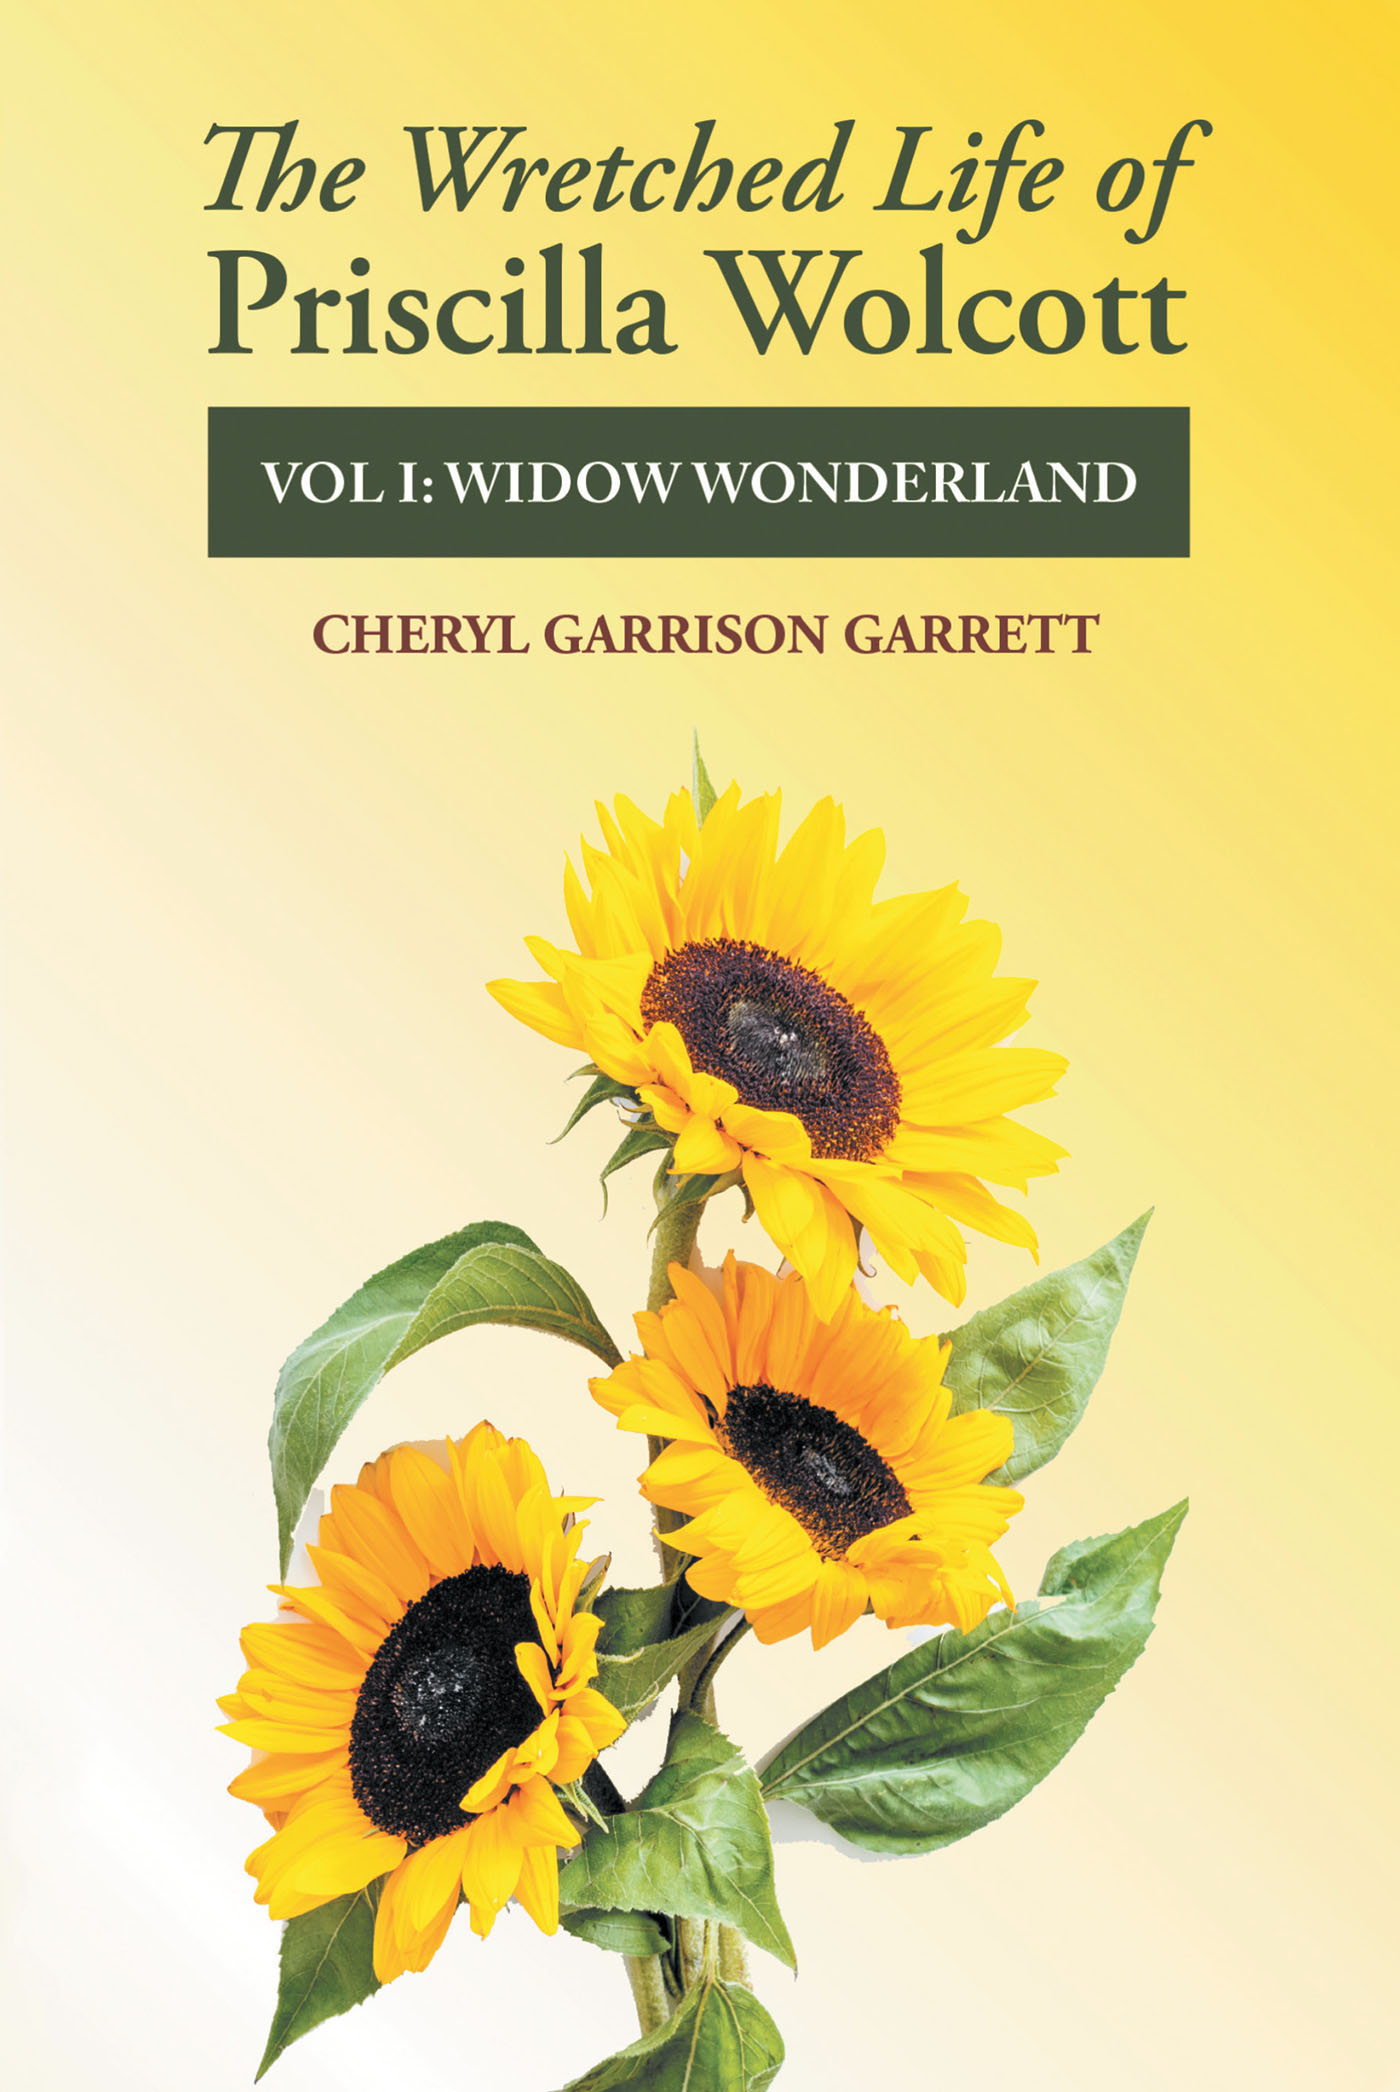 Author Cheryl Garrison Garrett’s New Book, "The Wretched Life of Priscilla Wolcott," Centers Around a Newly Widowed Woman Who Must Learn to Live, and Possibly Love, Again